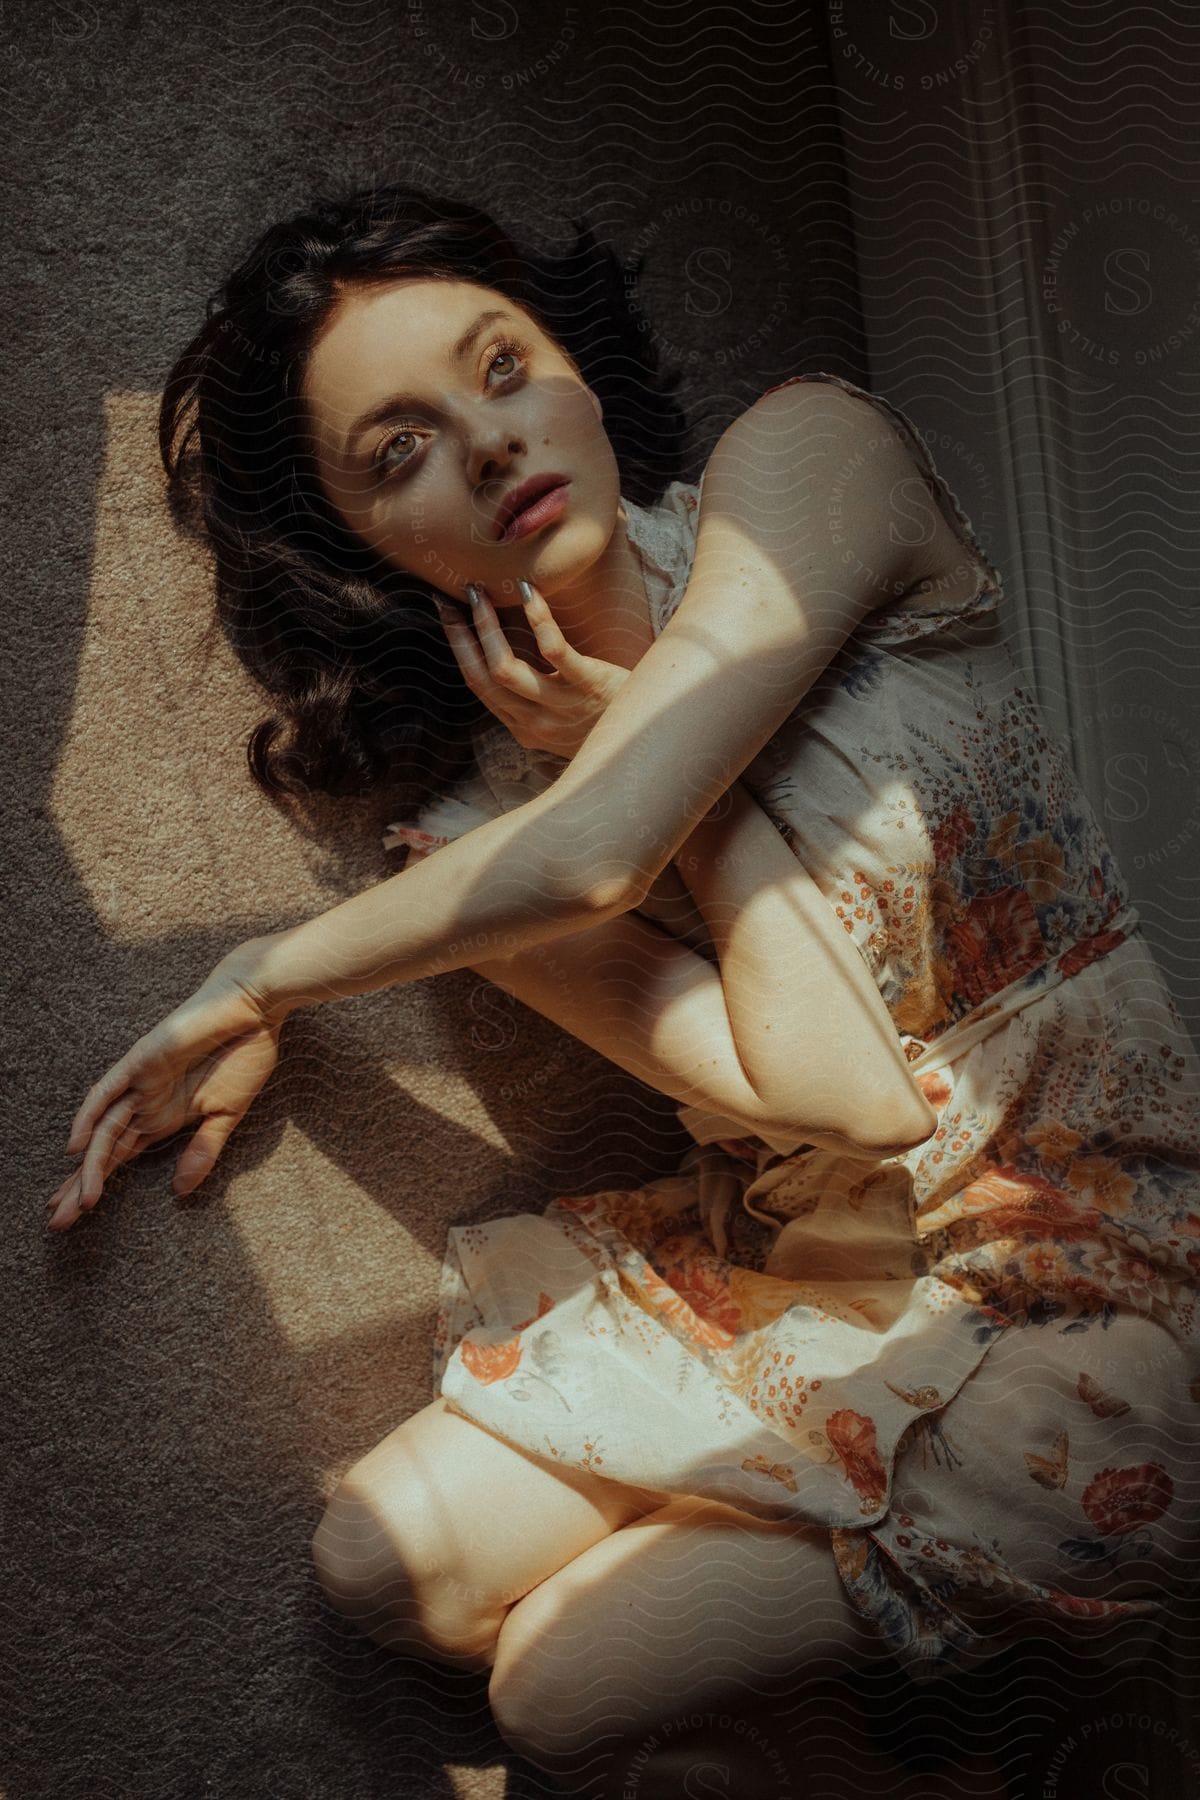 Stock photo of young woman in vintage flowered dress poses with arm across chest and another on face lying on tan carpet with shadow